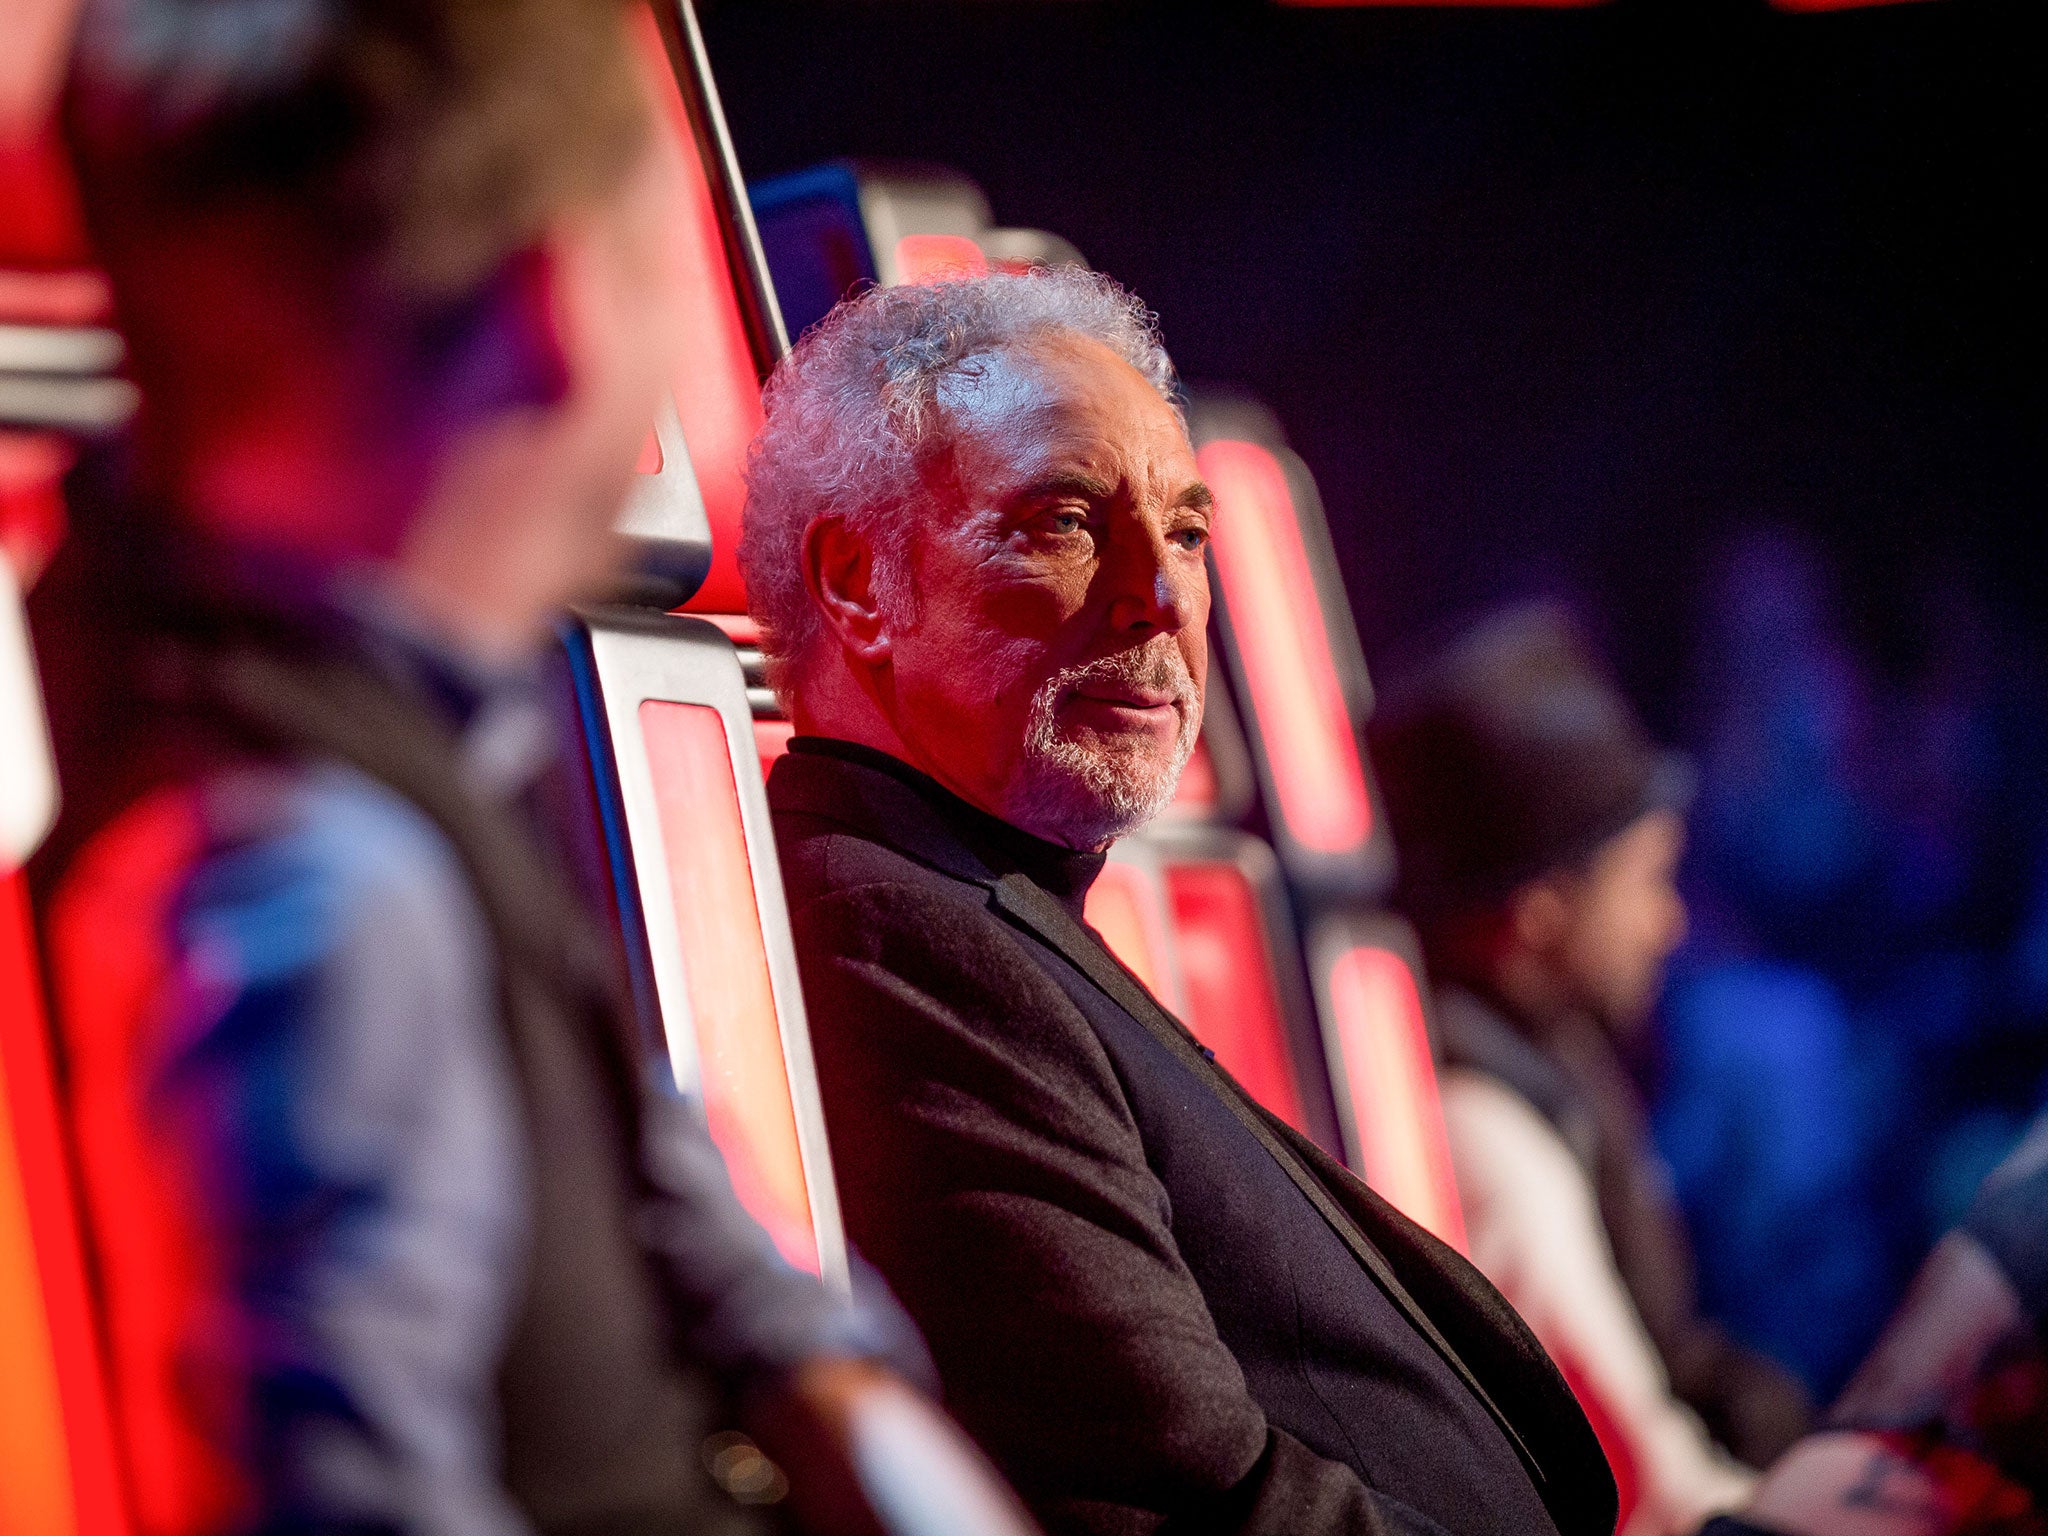 Tom Jones has been a judge on The Voice since the show launched in 2012